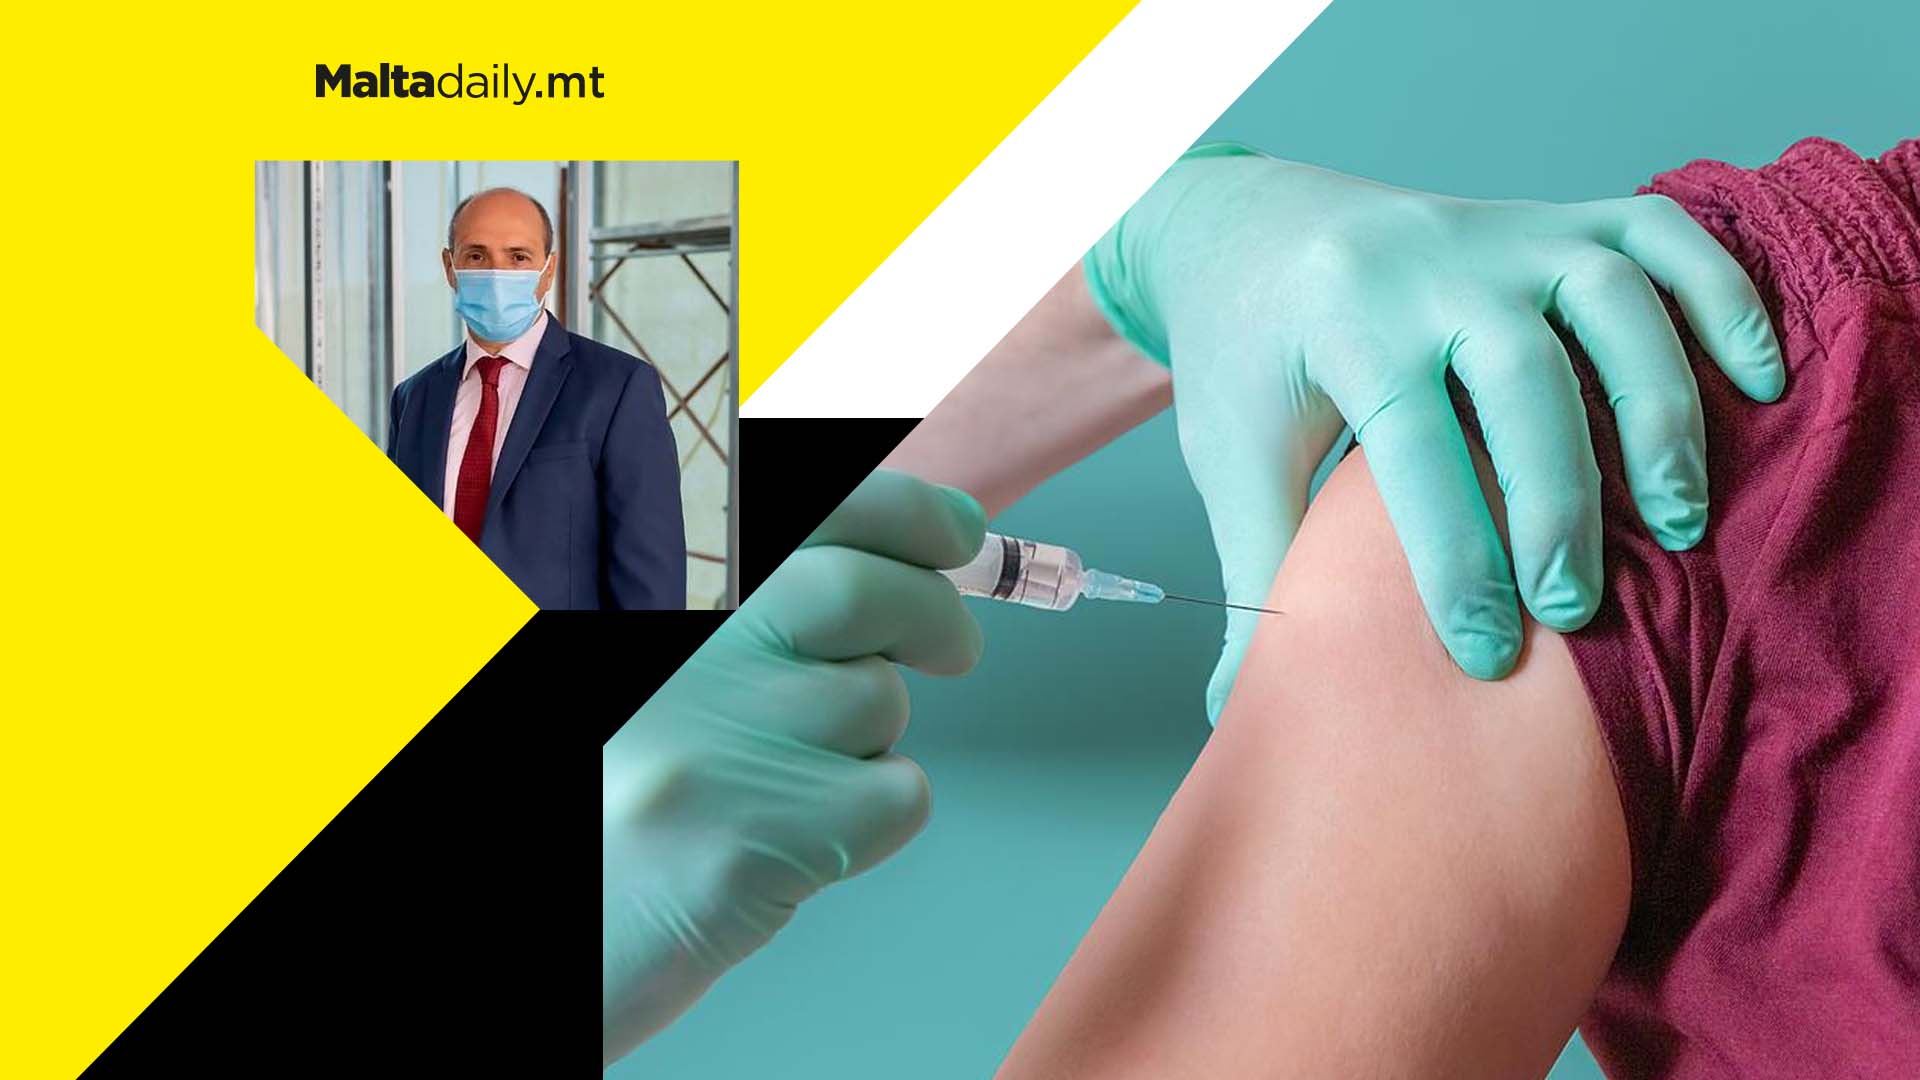 Malta has the largest amount of people vaccinated with booster